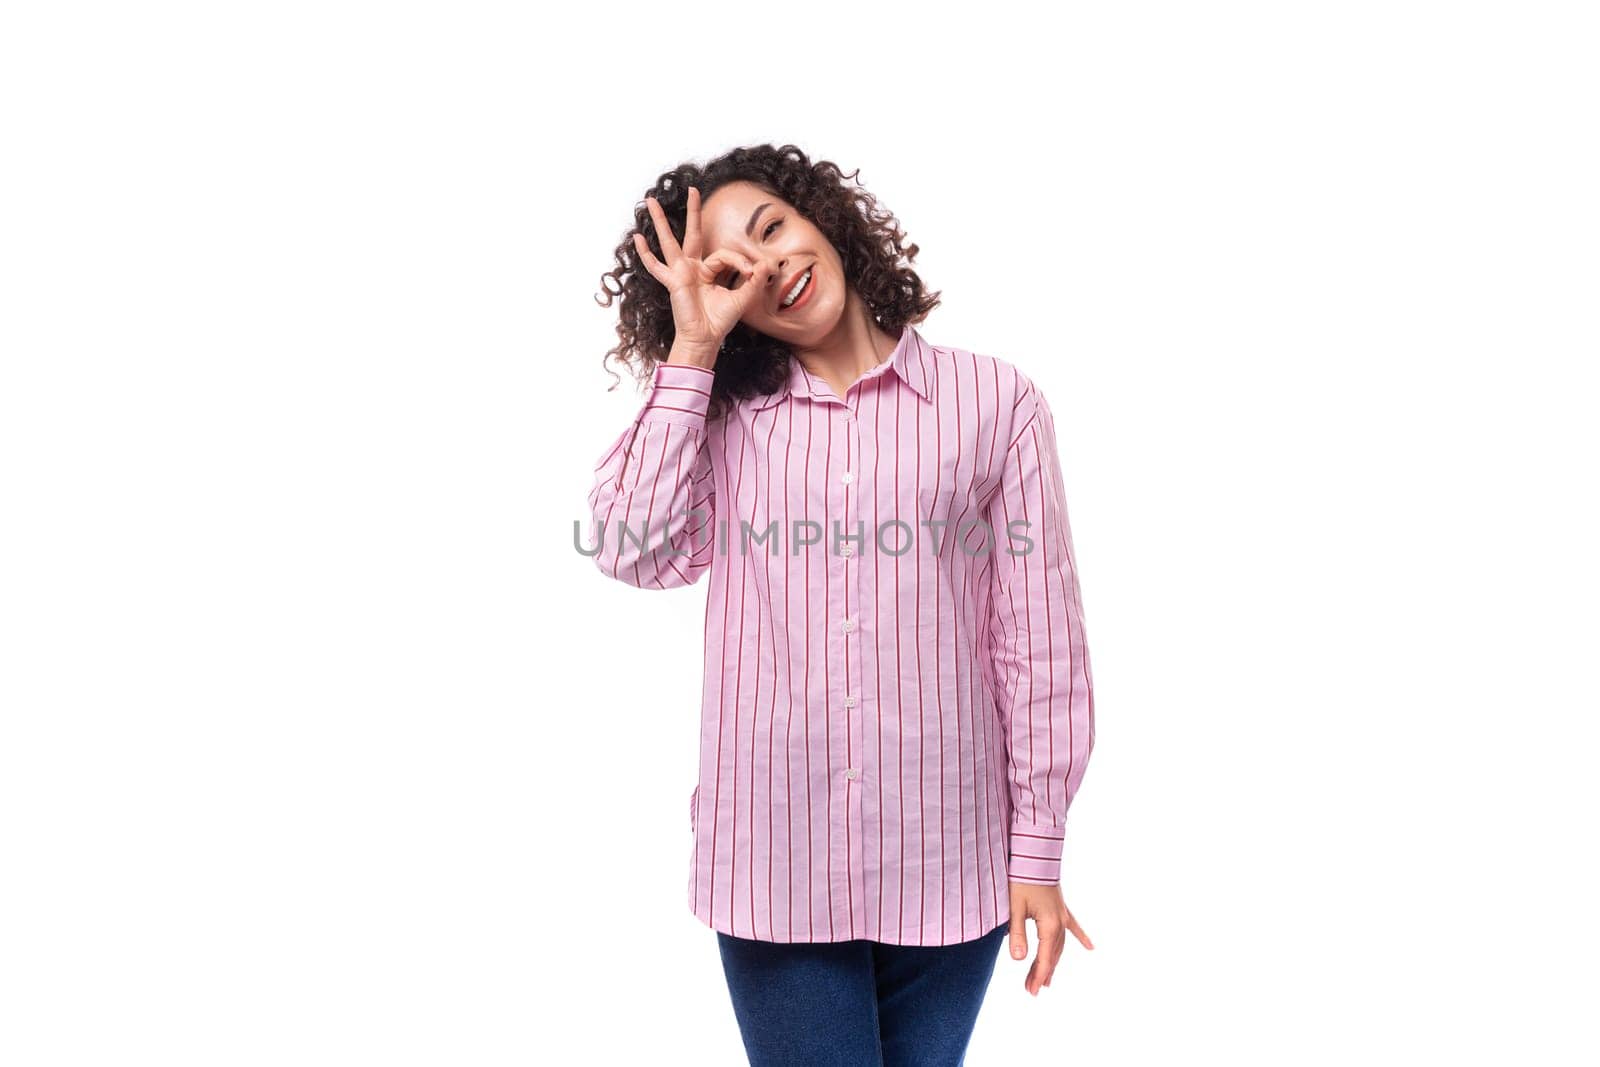 young leader woman with curly hair dressed in a pink shirt and jeans.